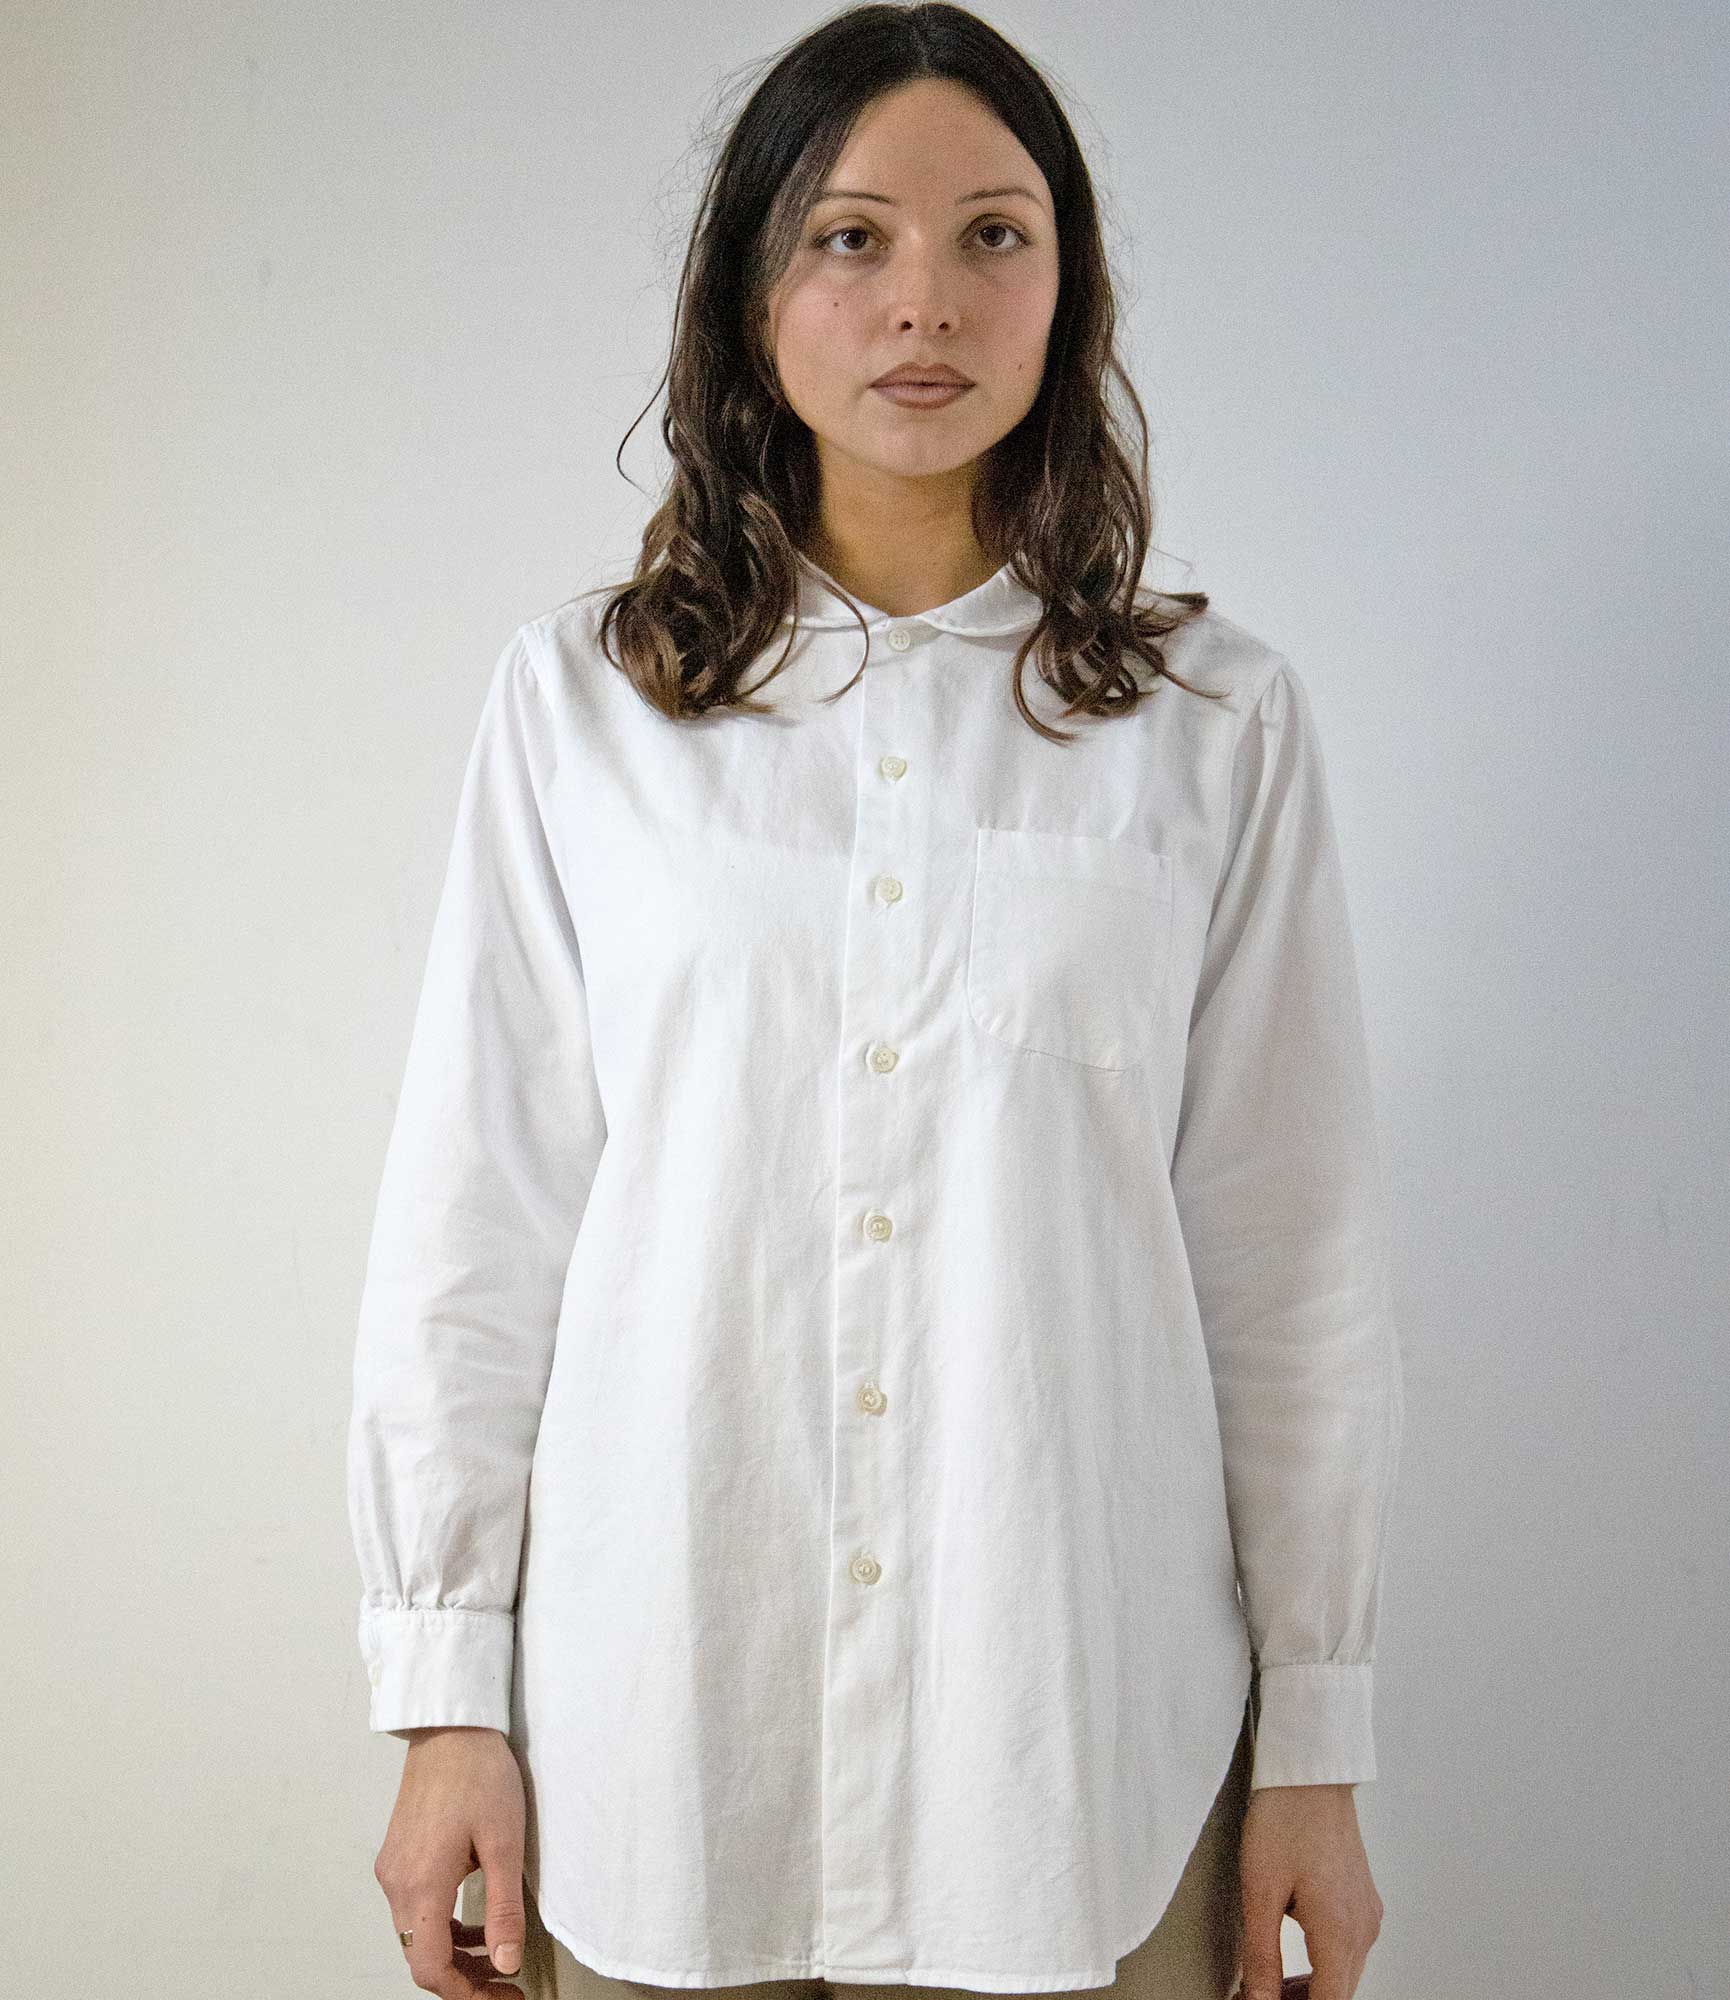 Engineered Garments Rounded Collar Shirt - White Cotton Oxford